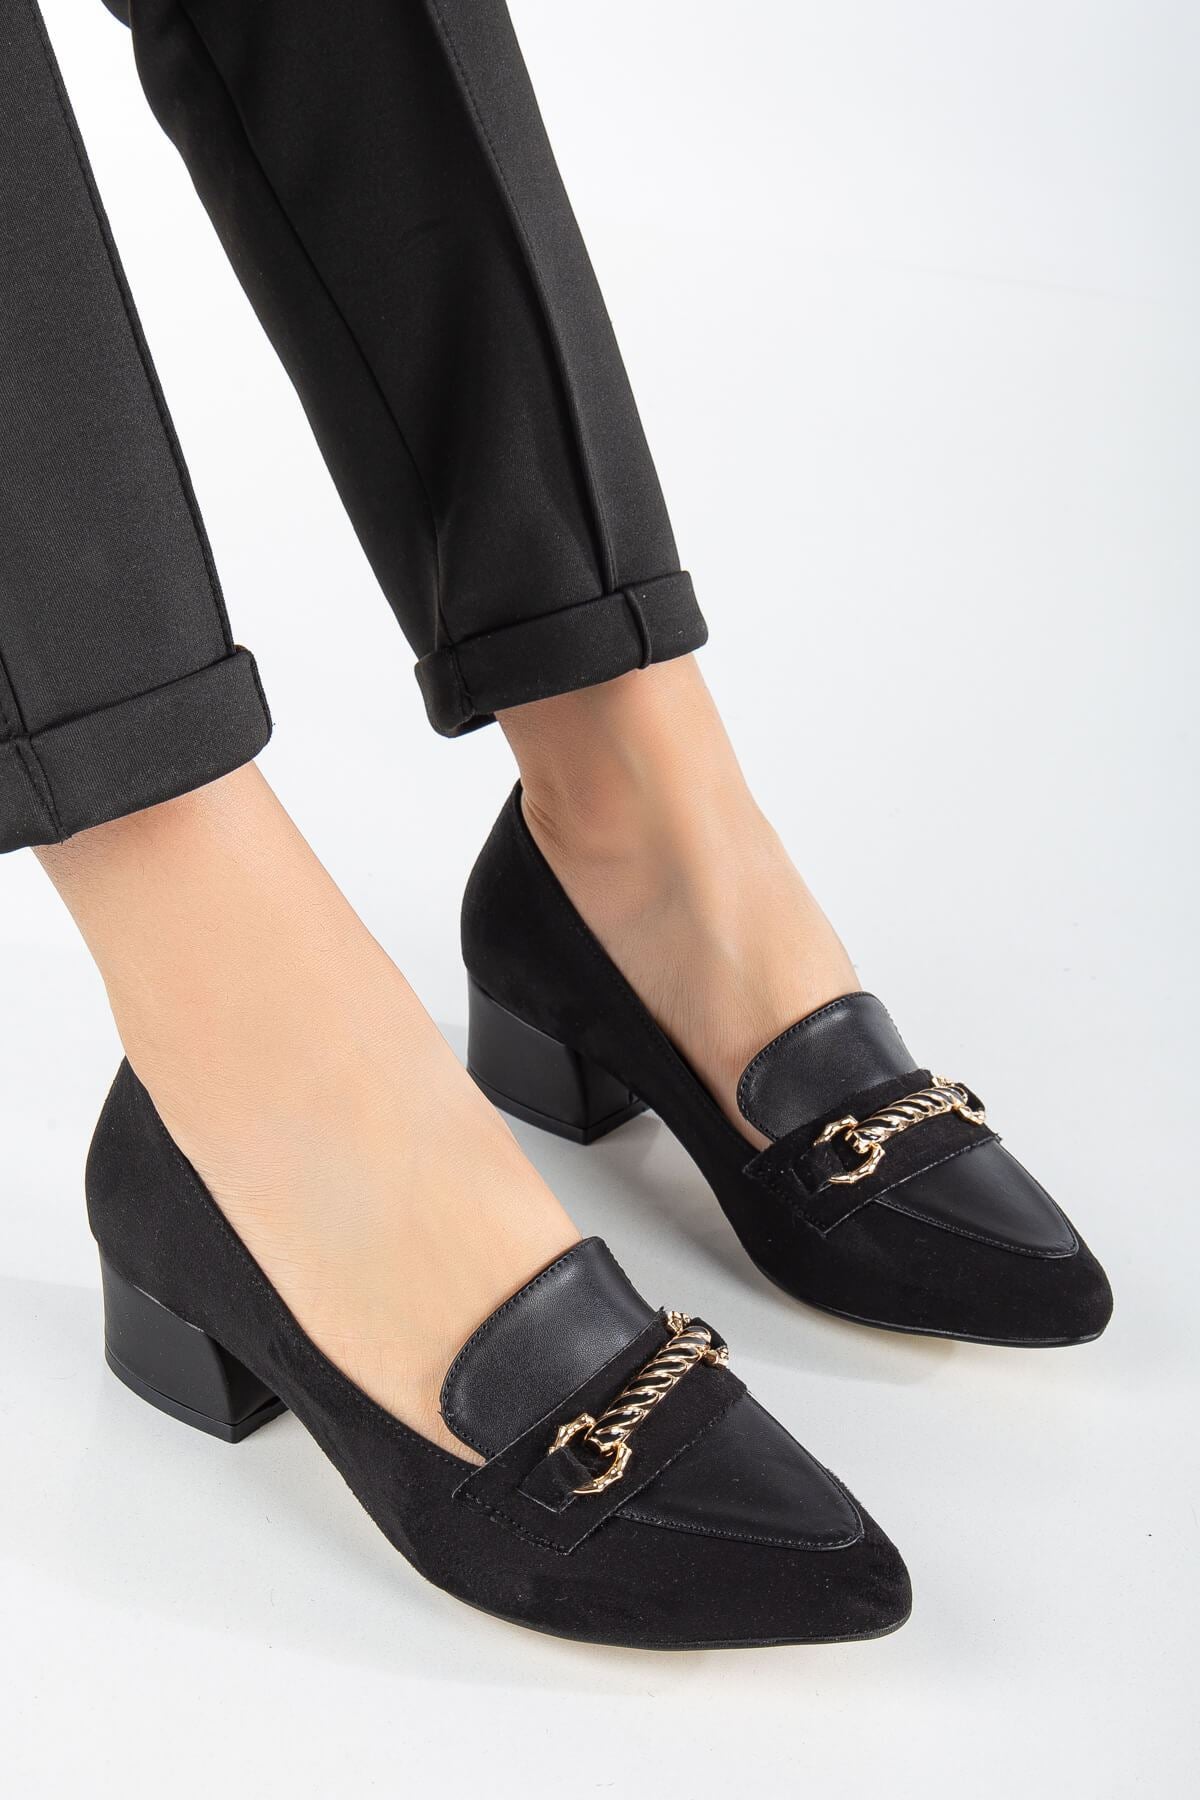 Women's Low Heeled Shoes Black Suede with Skin Buckle Detail - STREETMODE™